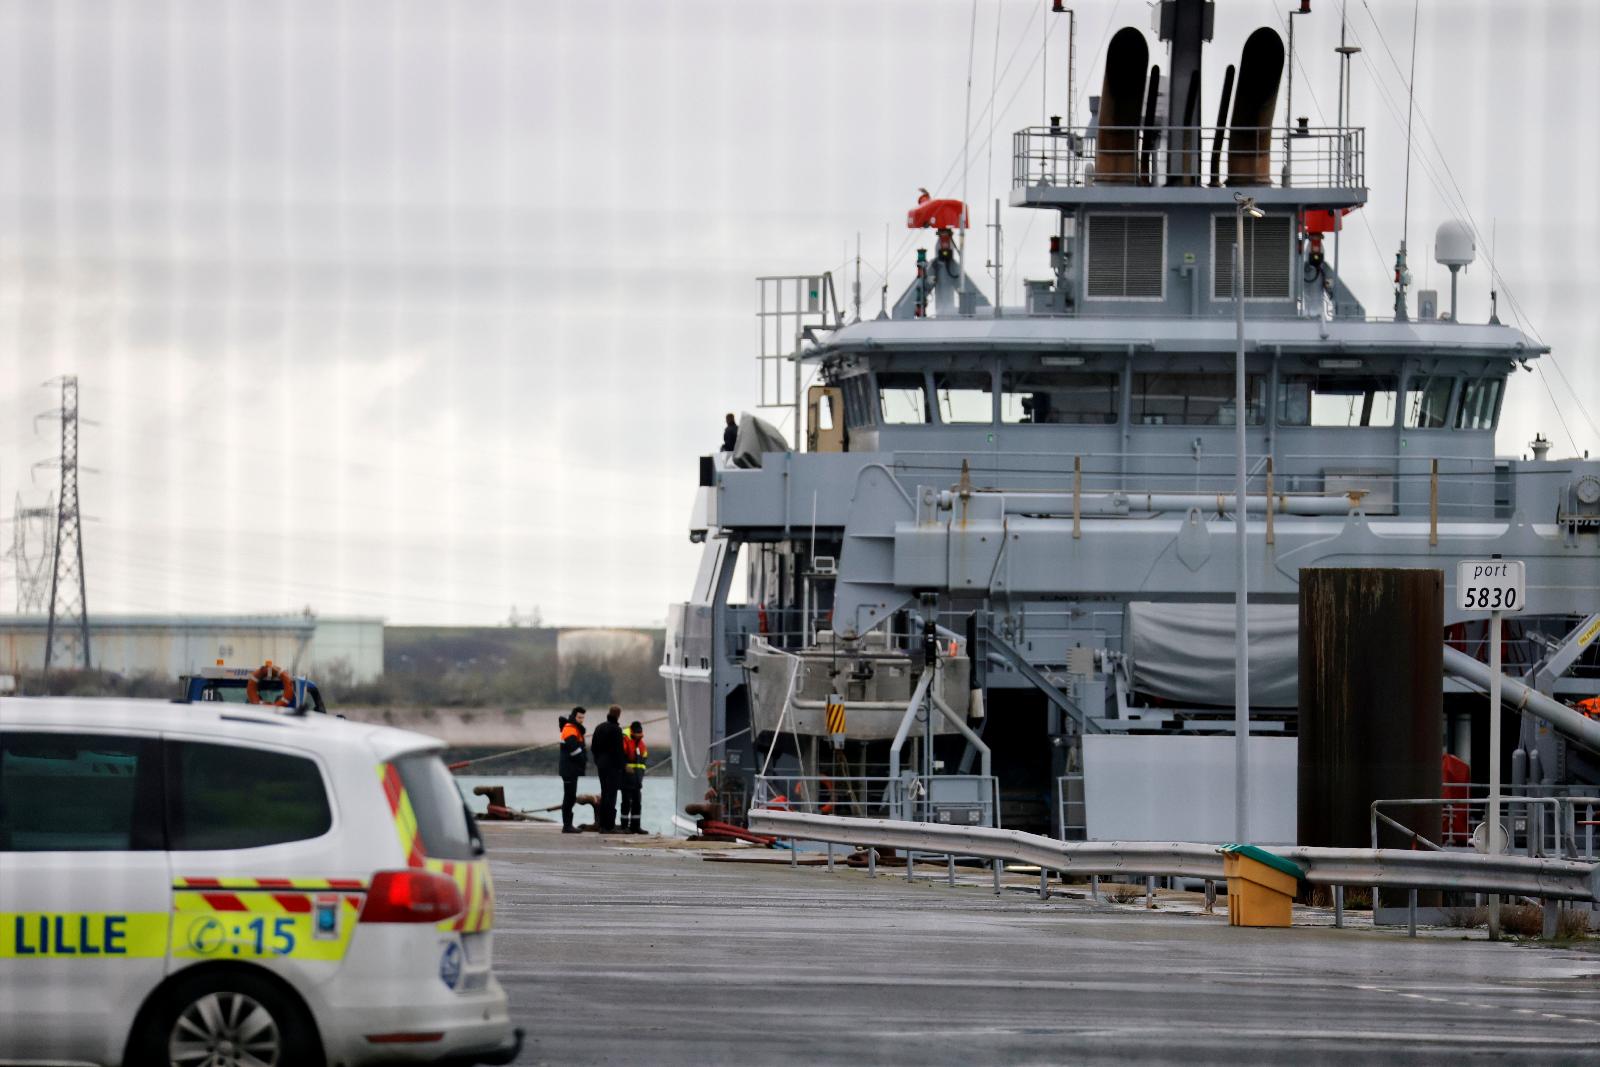 Time to weep for these latest refugees who died crossing the Channel